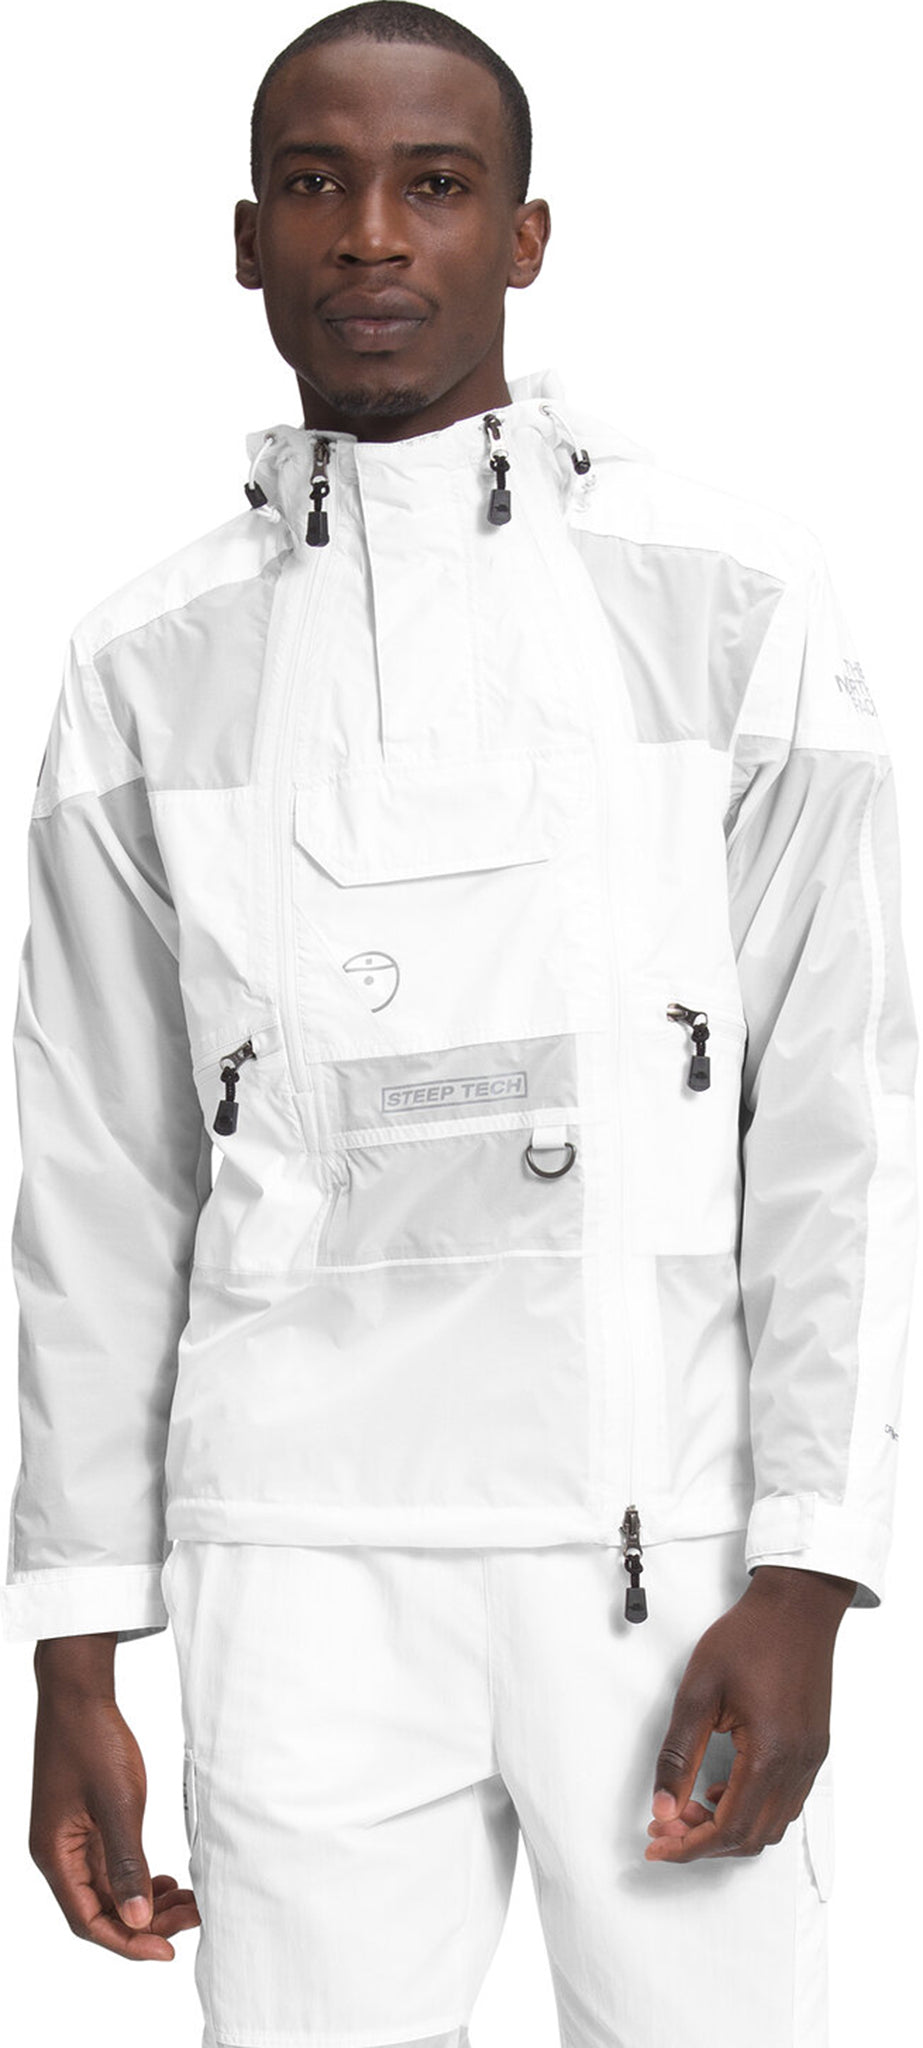 The North Face Steep tech Light rain jacket in white